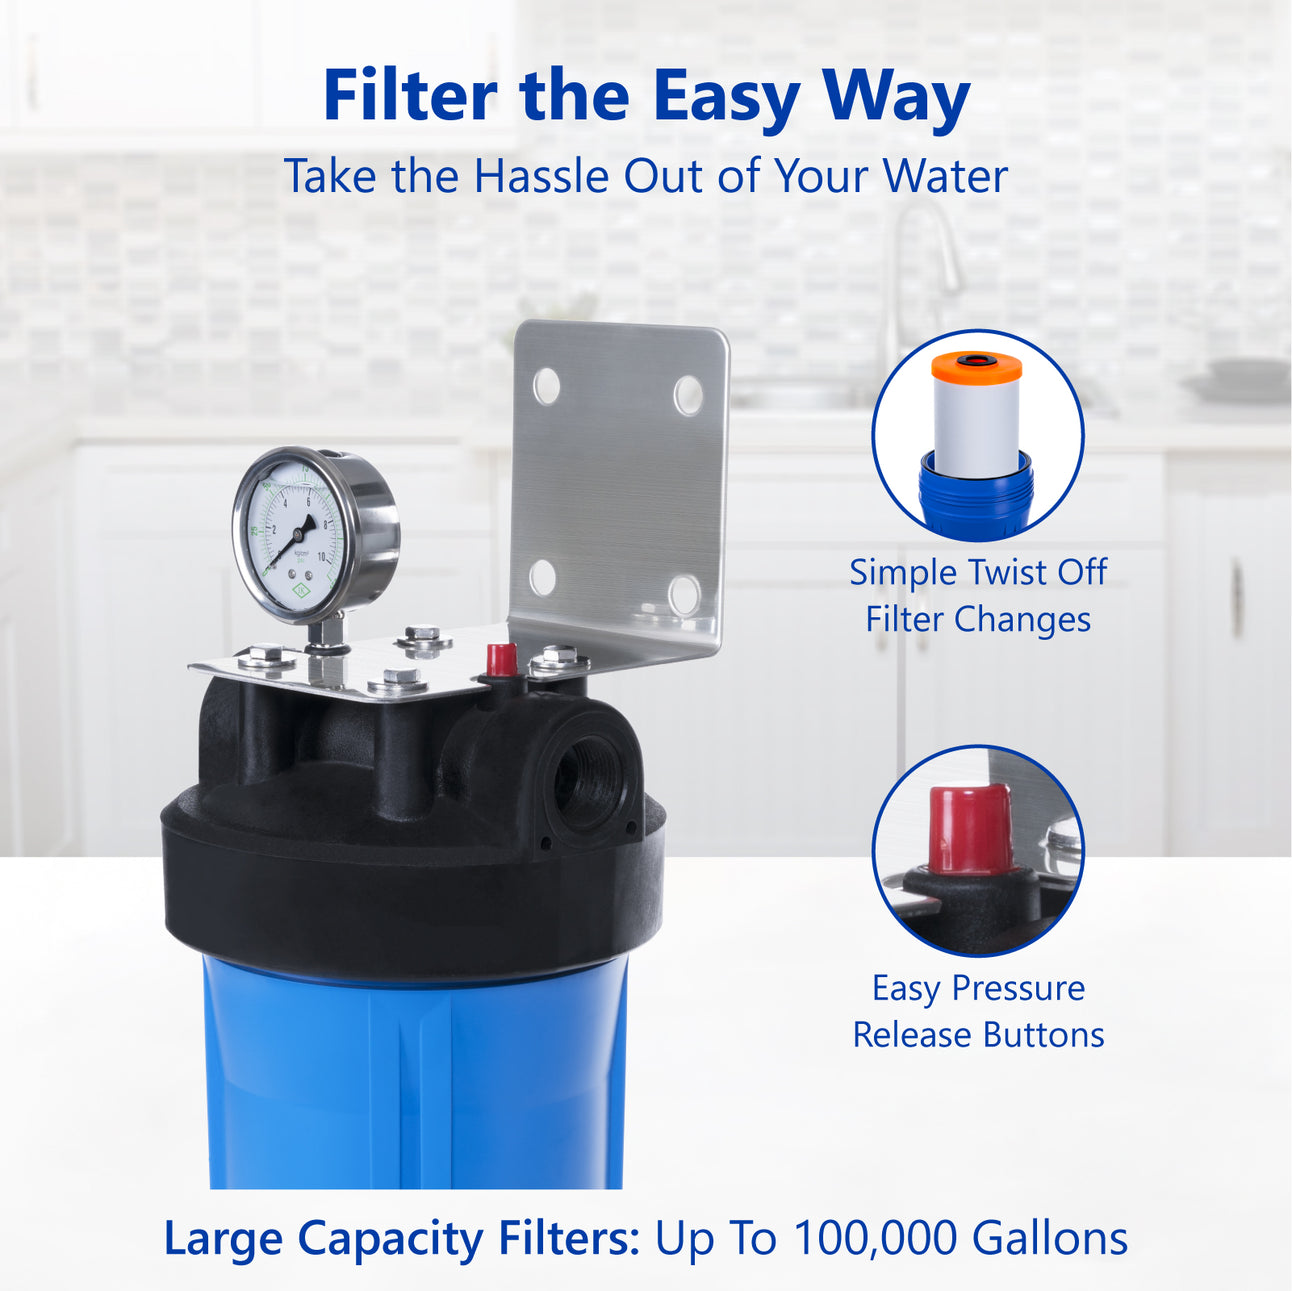 Should I Install My Whole House Water Filter Before or After the